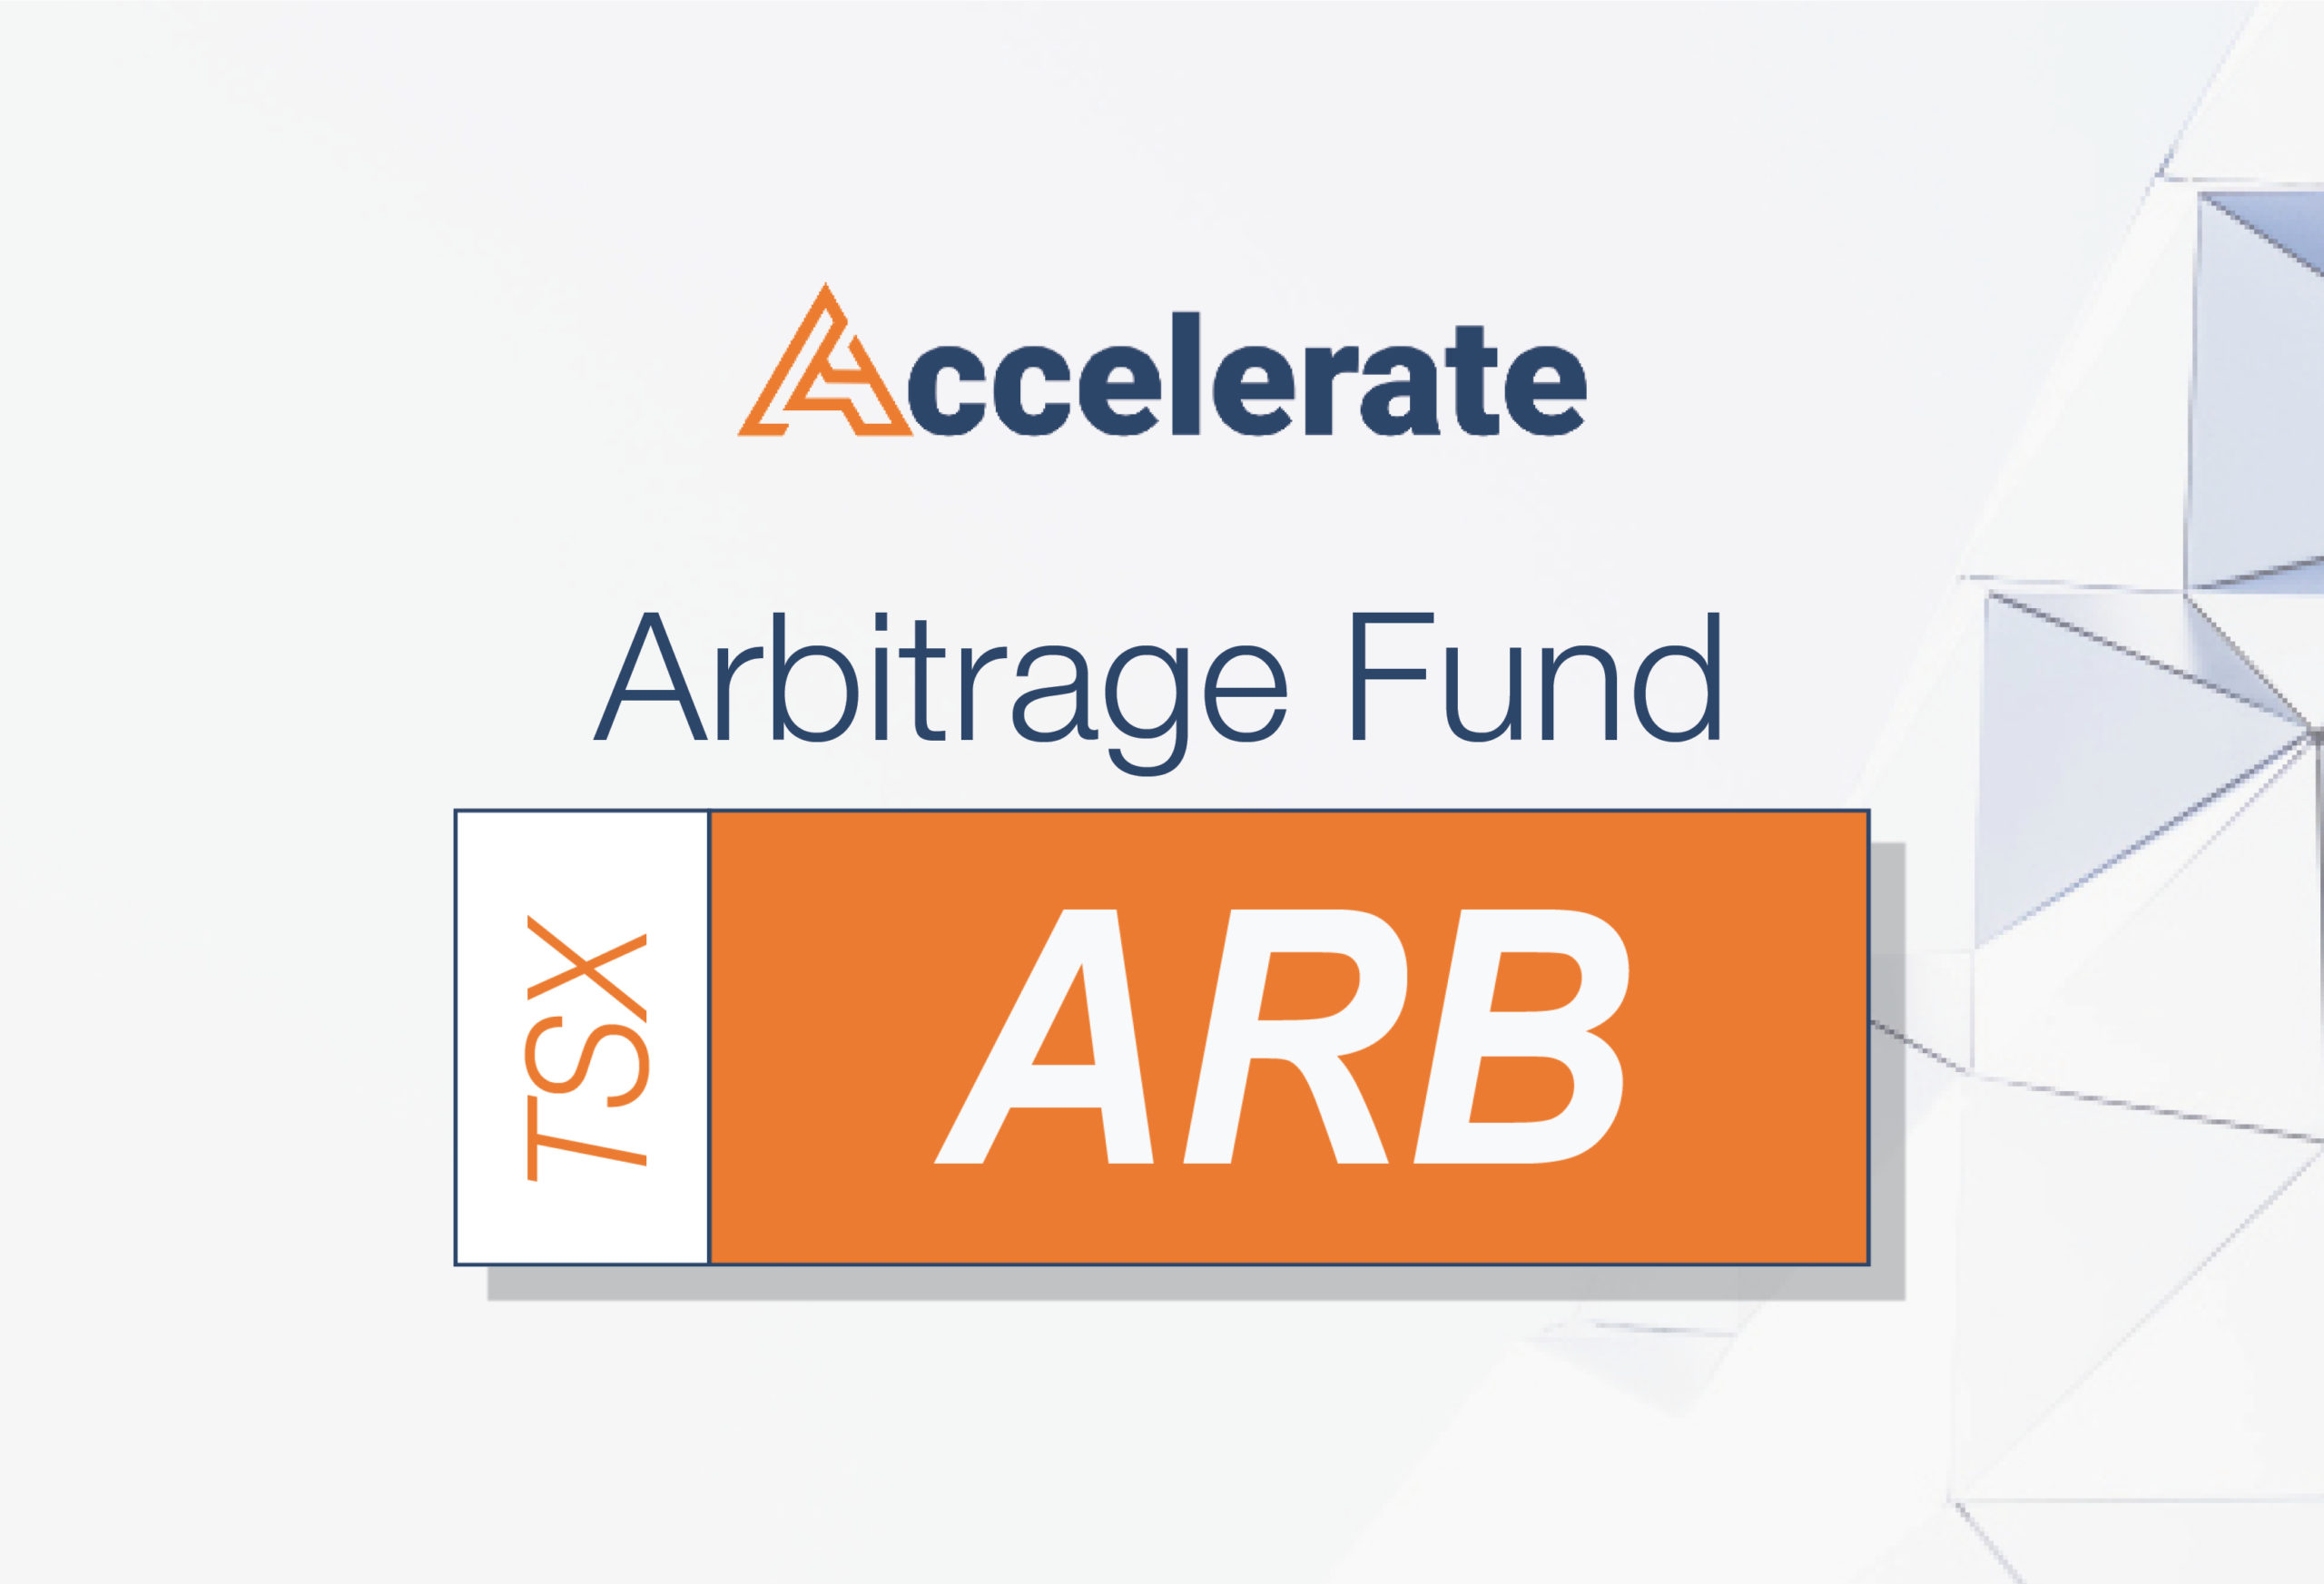 Accelerate Arbitrage Fund to Debut April 7, 2020